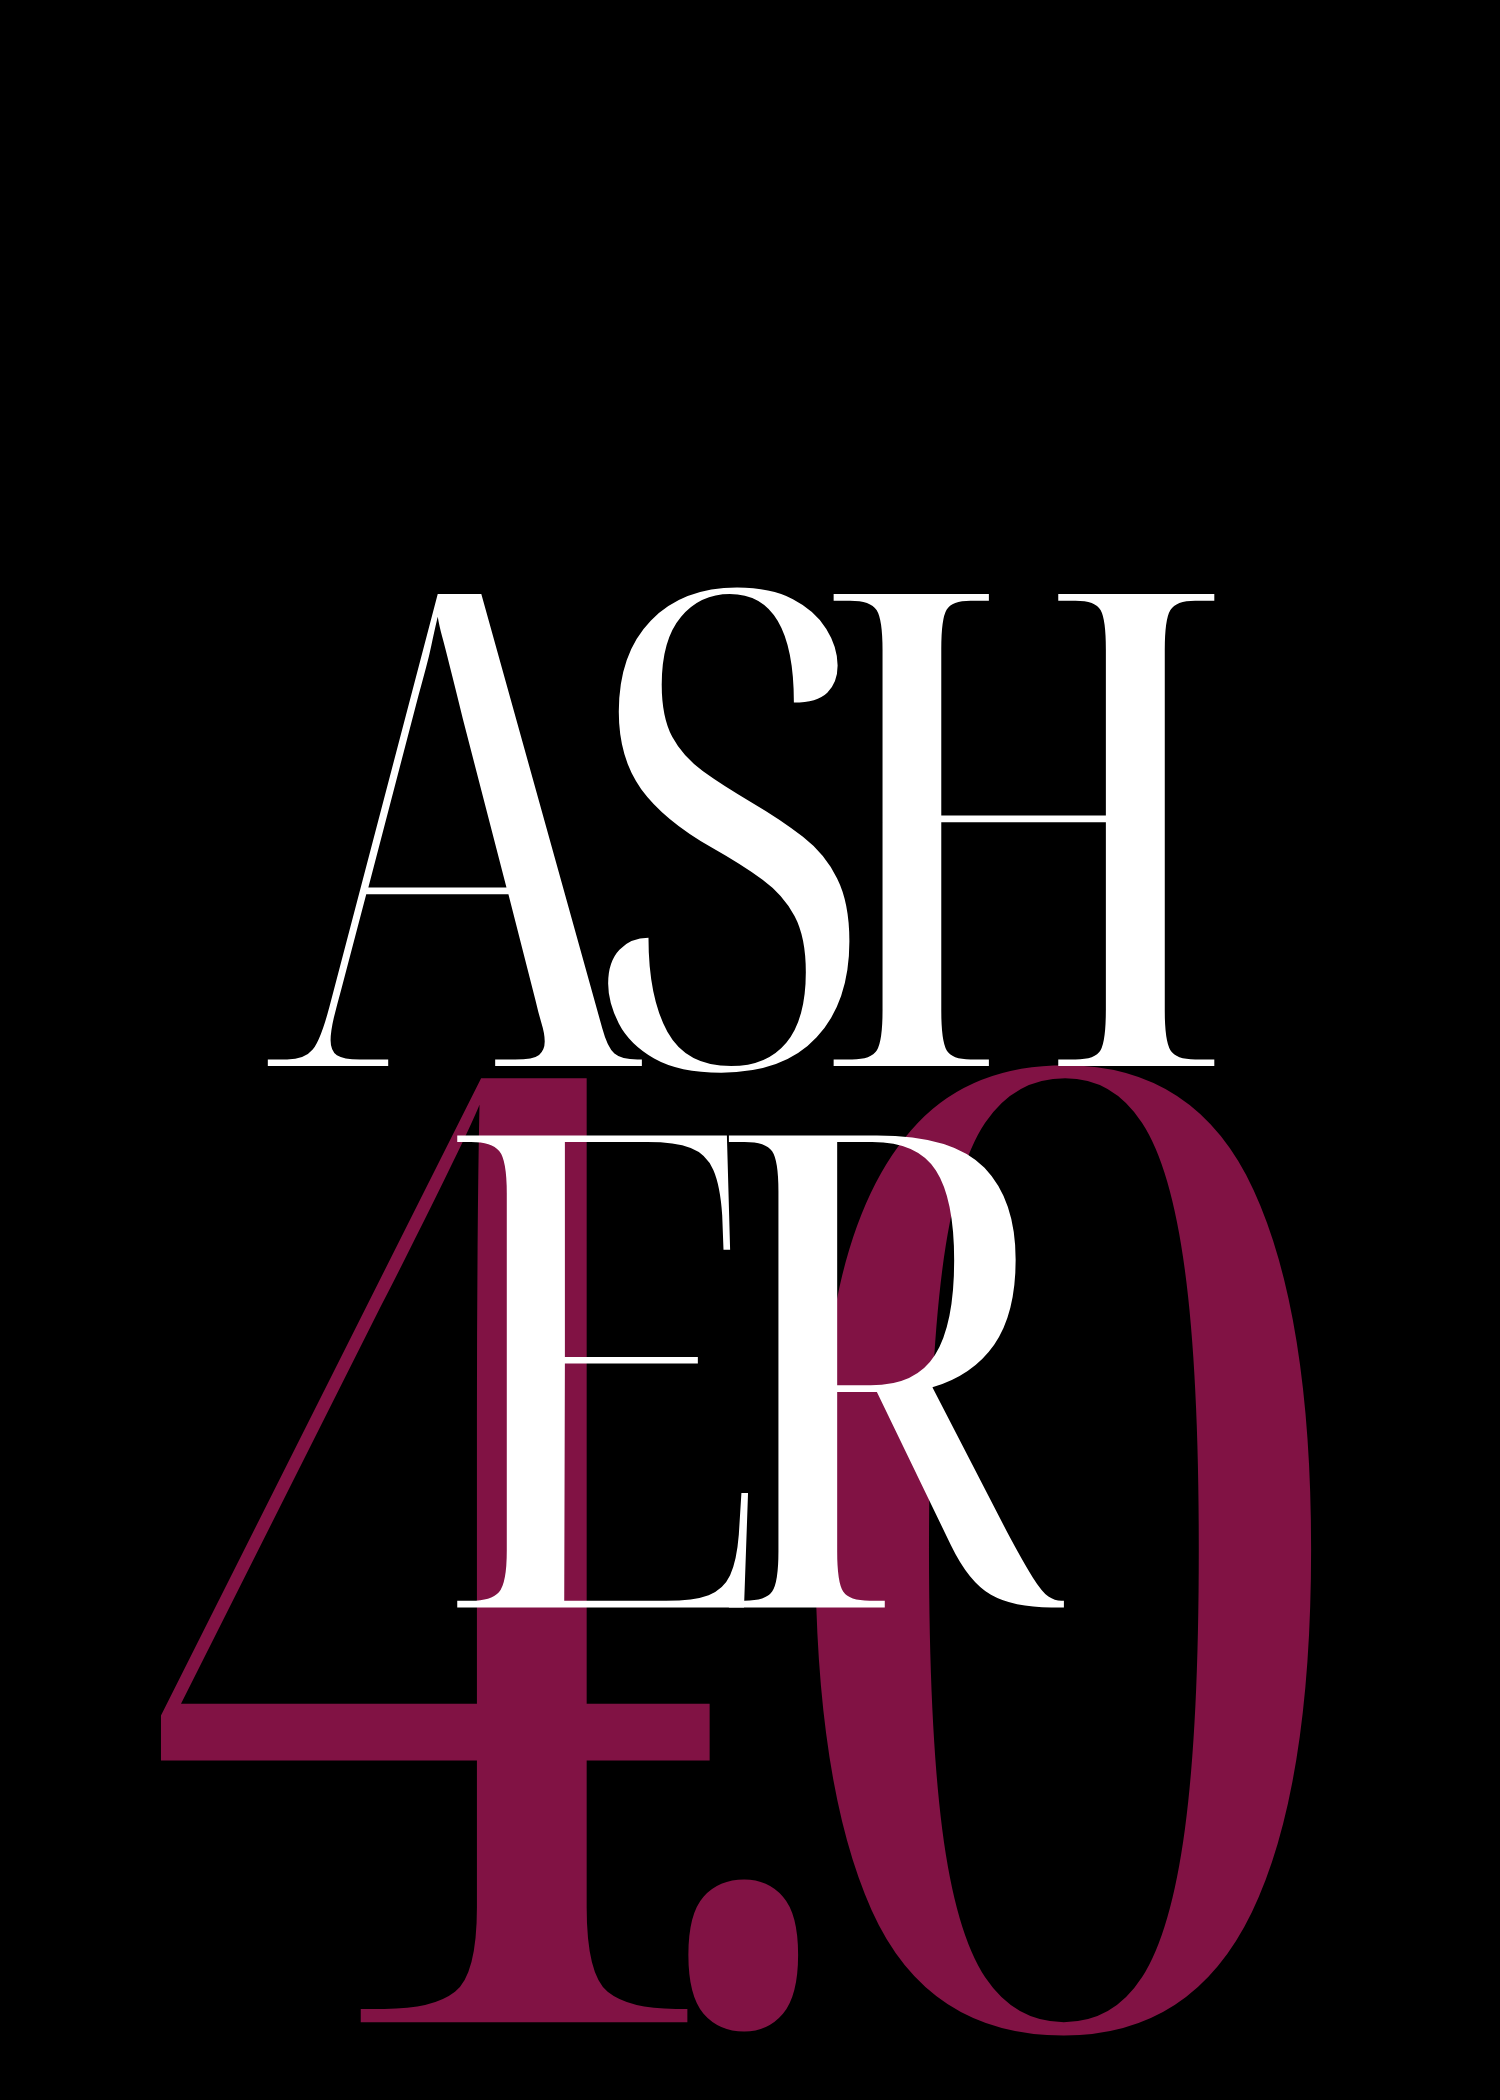 ASHER is 40